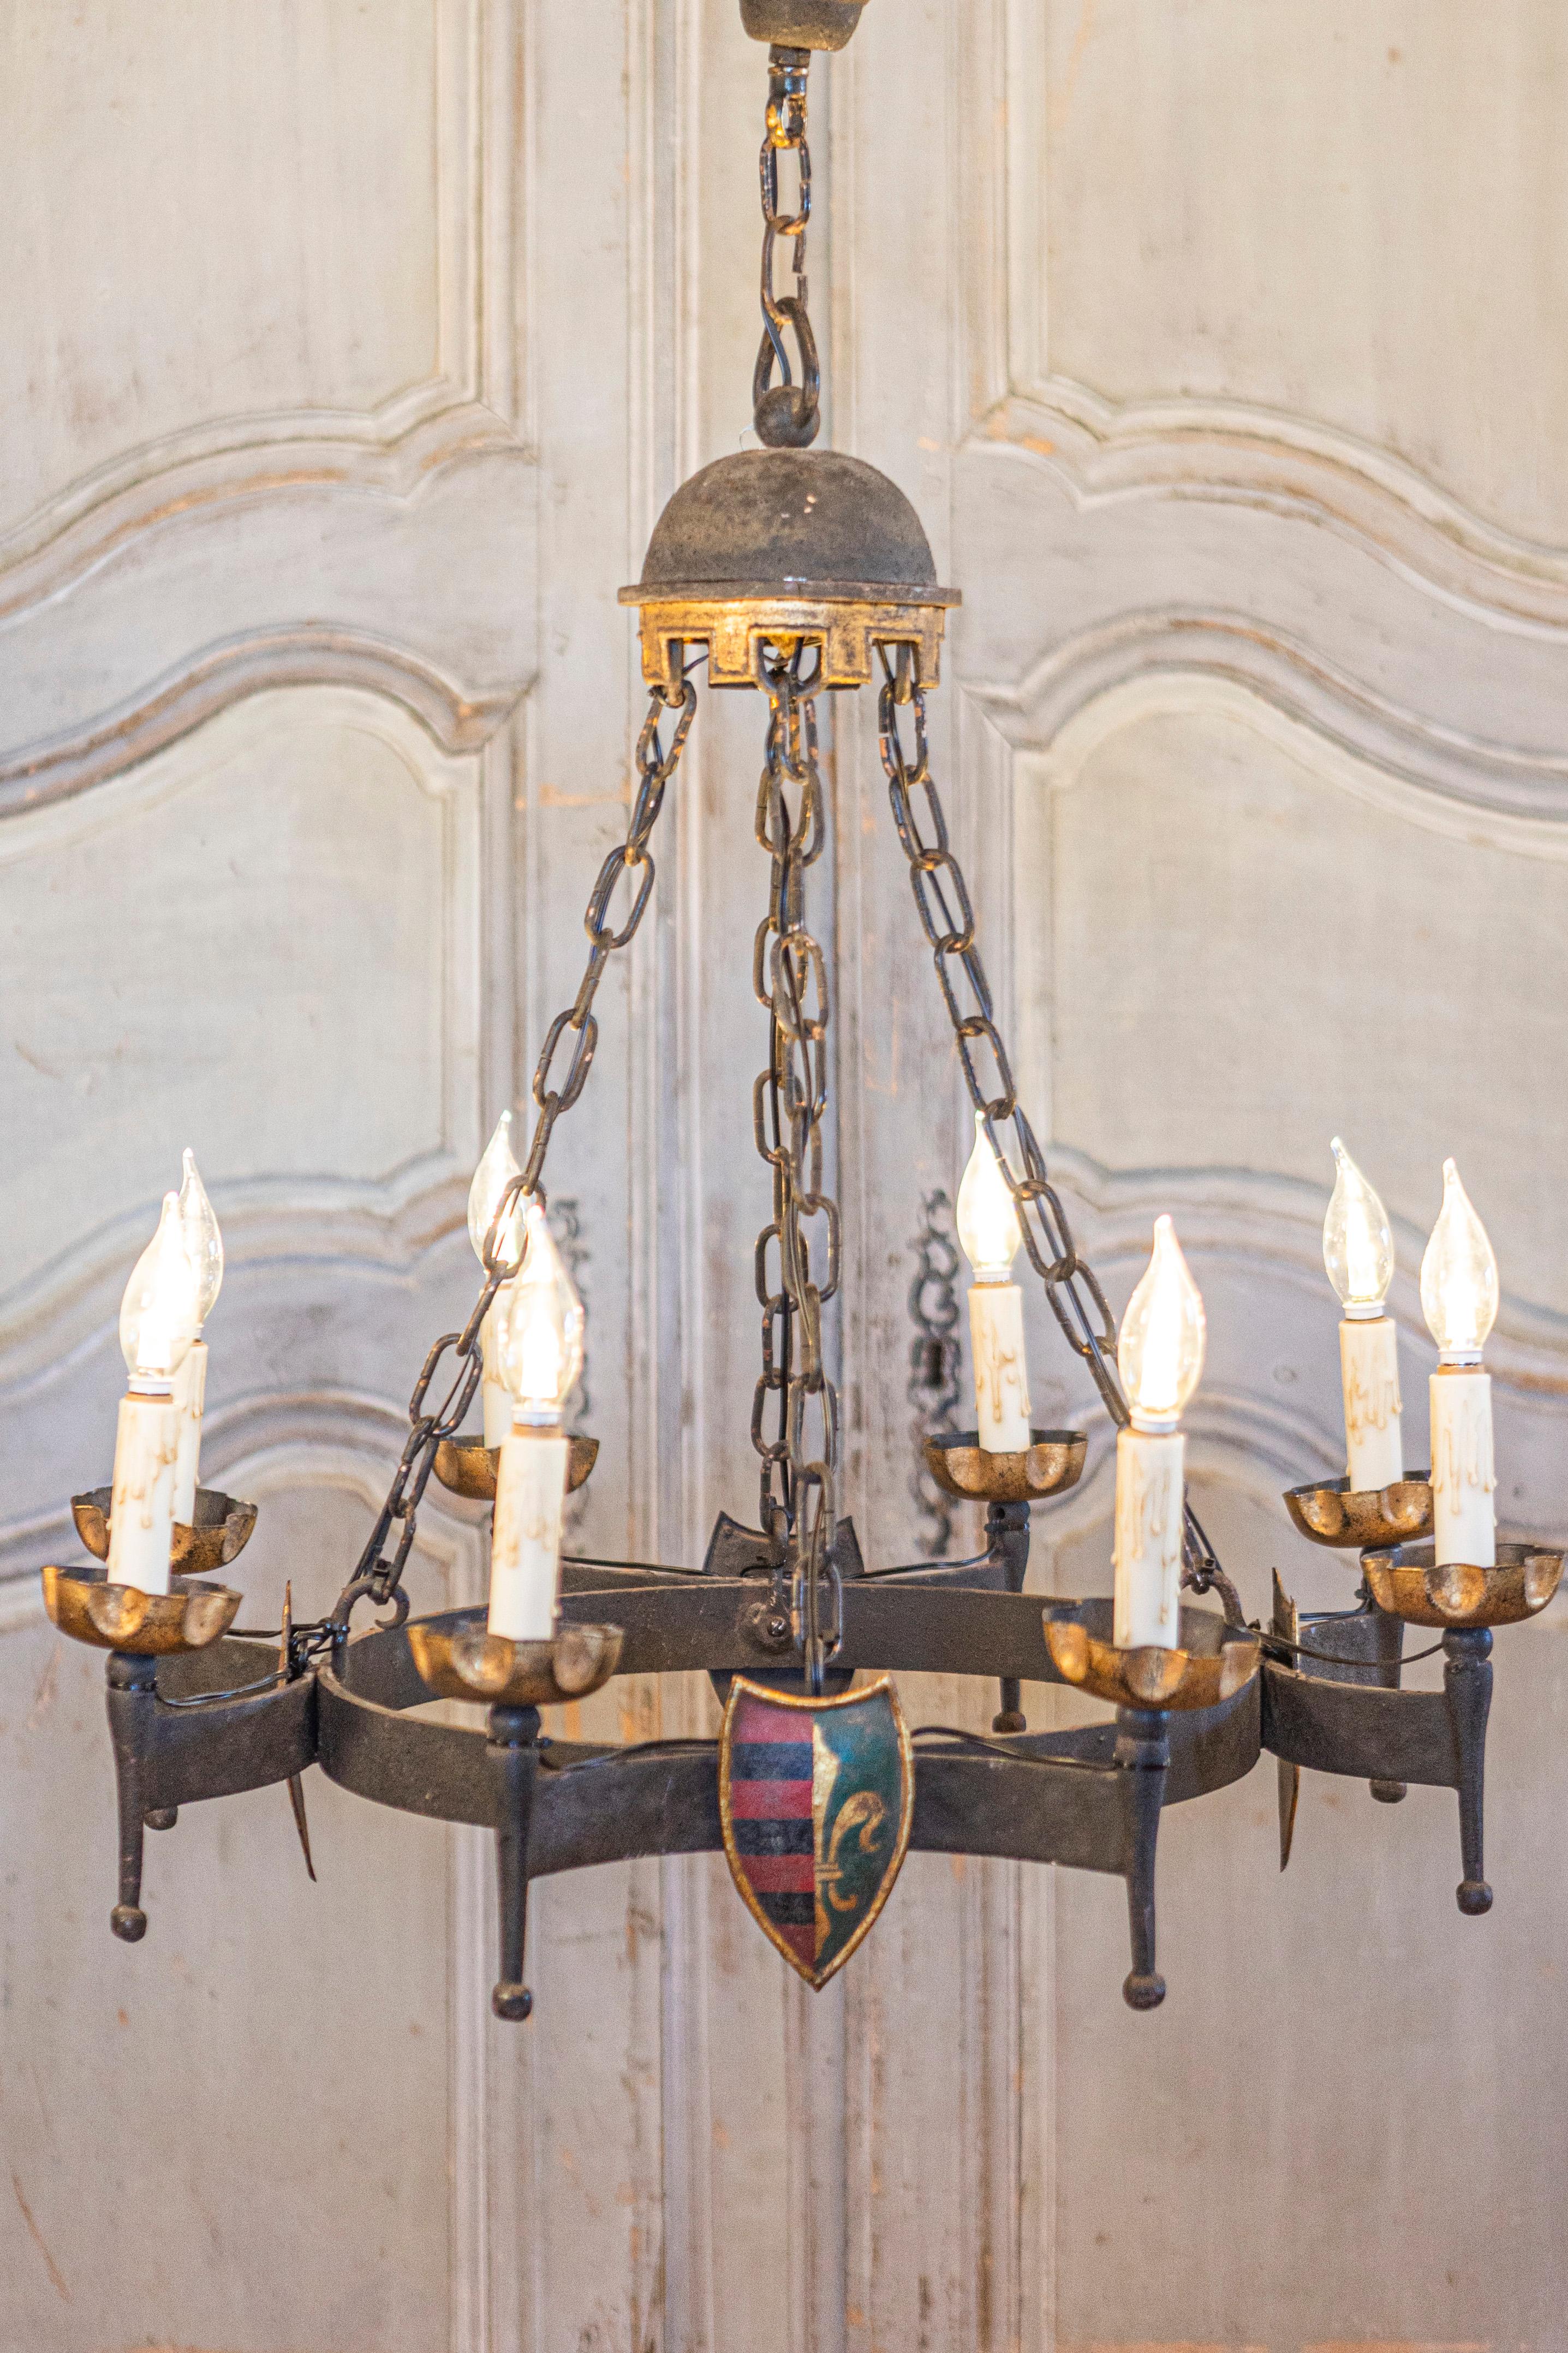 A French Gothic style eight-light iron chandelier from the 20th century with hand-painted crests. This French Gothic style chandelier from the 20th century is an exquisite example of craftsmanship, featuring an eight-light iron structure adorned